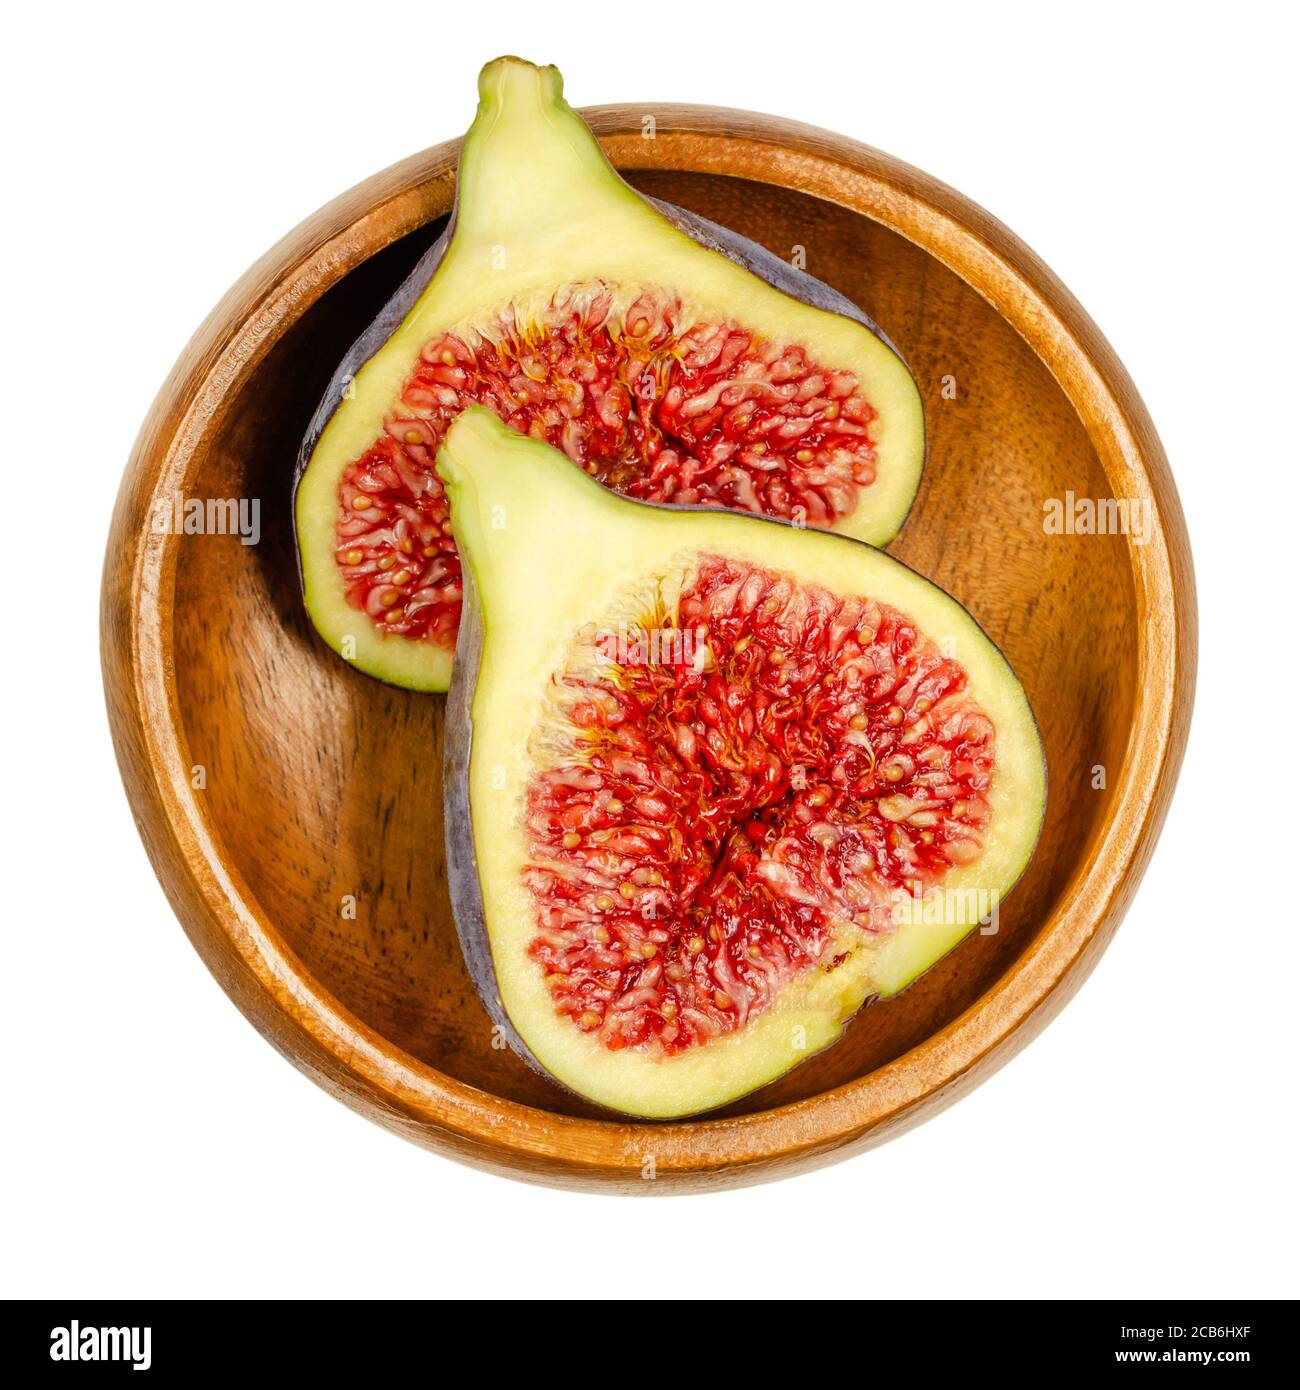 Fresh fig cut in two halves, in a wooden bowl. Fruit with purple skin and red flesh. Common figs can be eaten fresh, dried or as jam. Ficus carica. Stock Photo